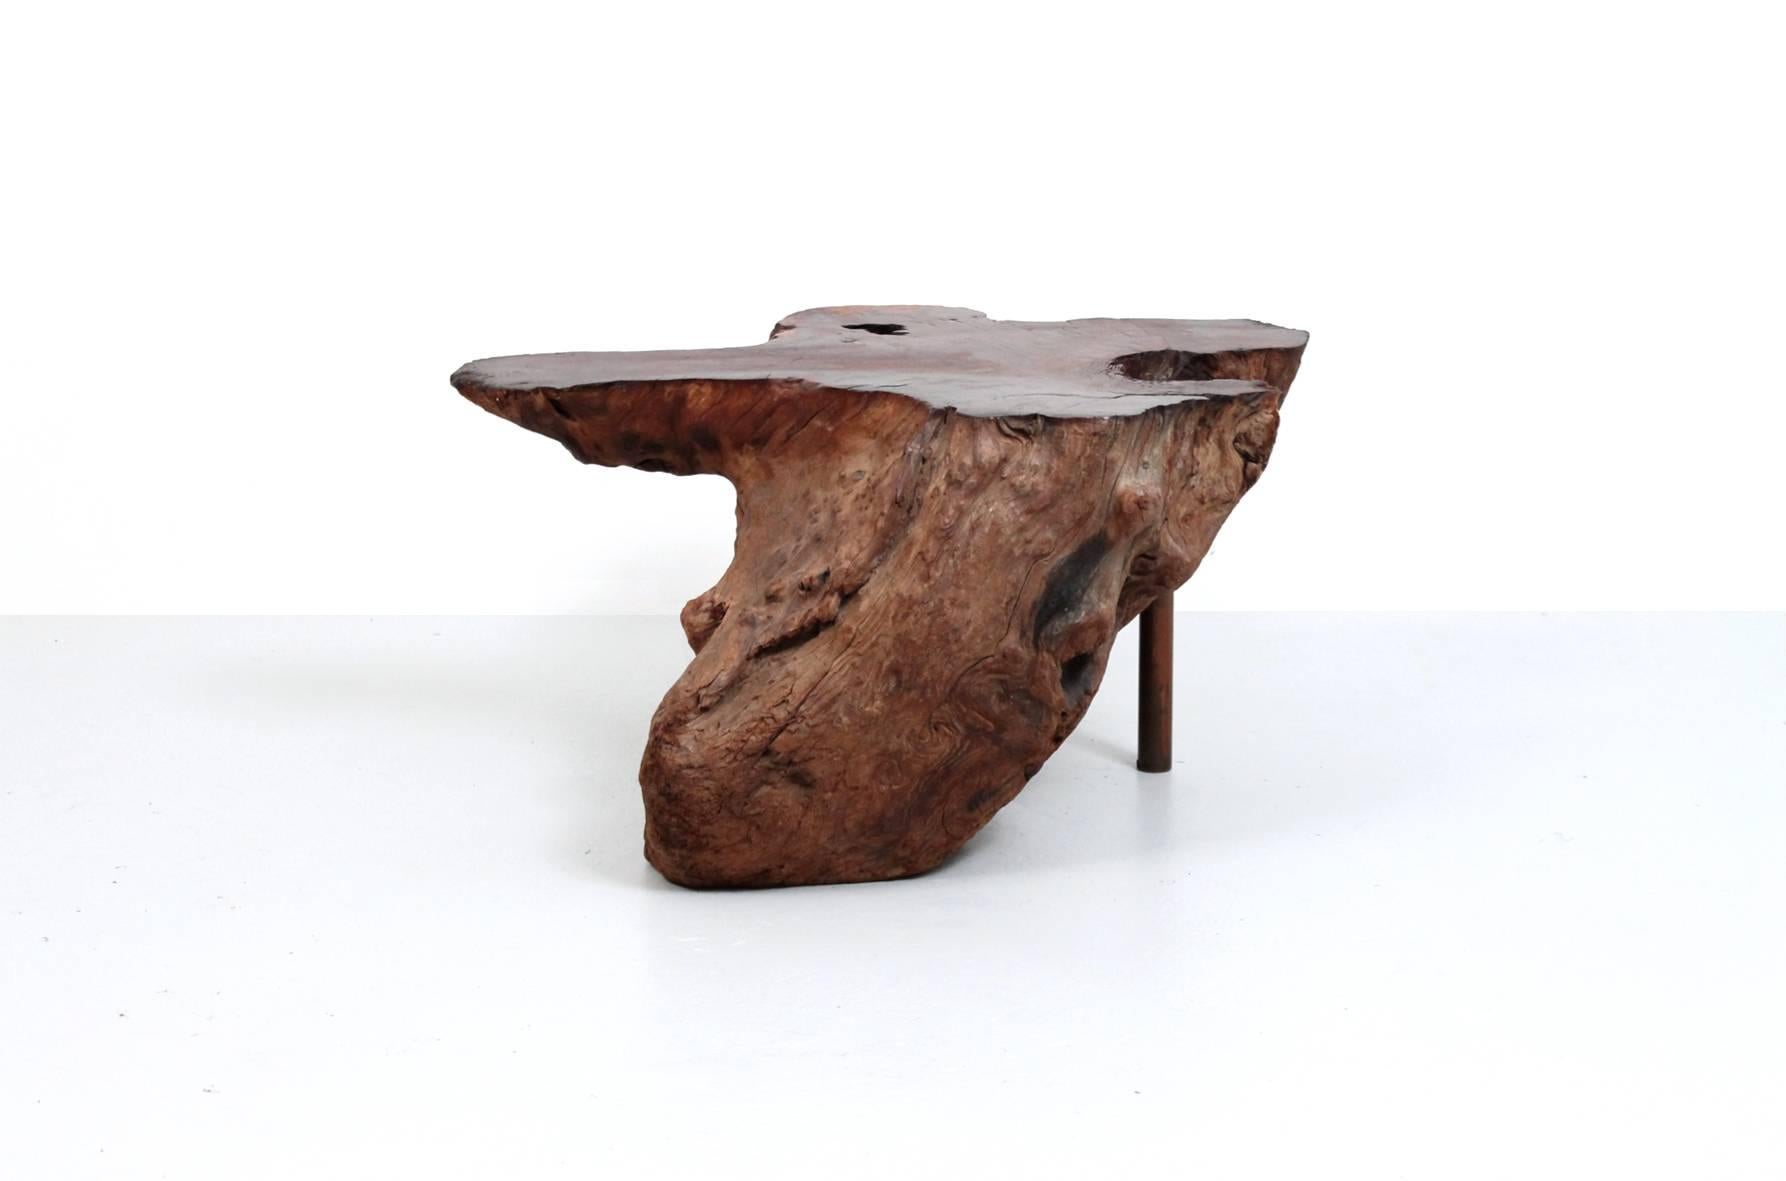 Walnut burl stump side table with copper leg. Graphic and sculptural. Very reminiscent of the work of Carl Auböck.
                    